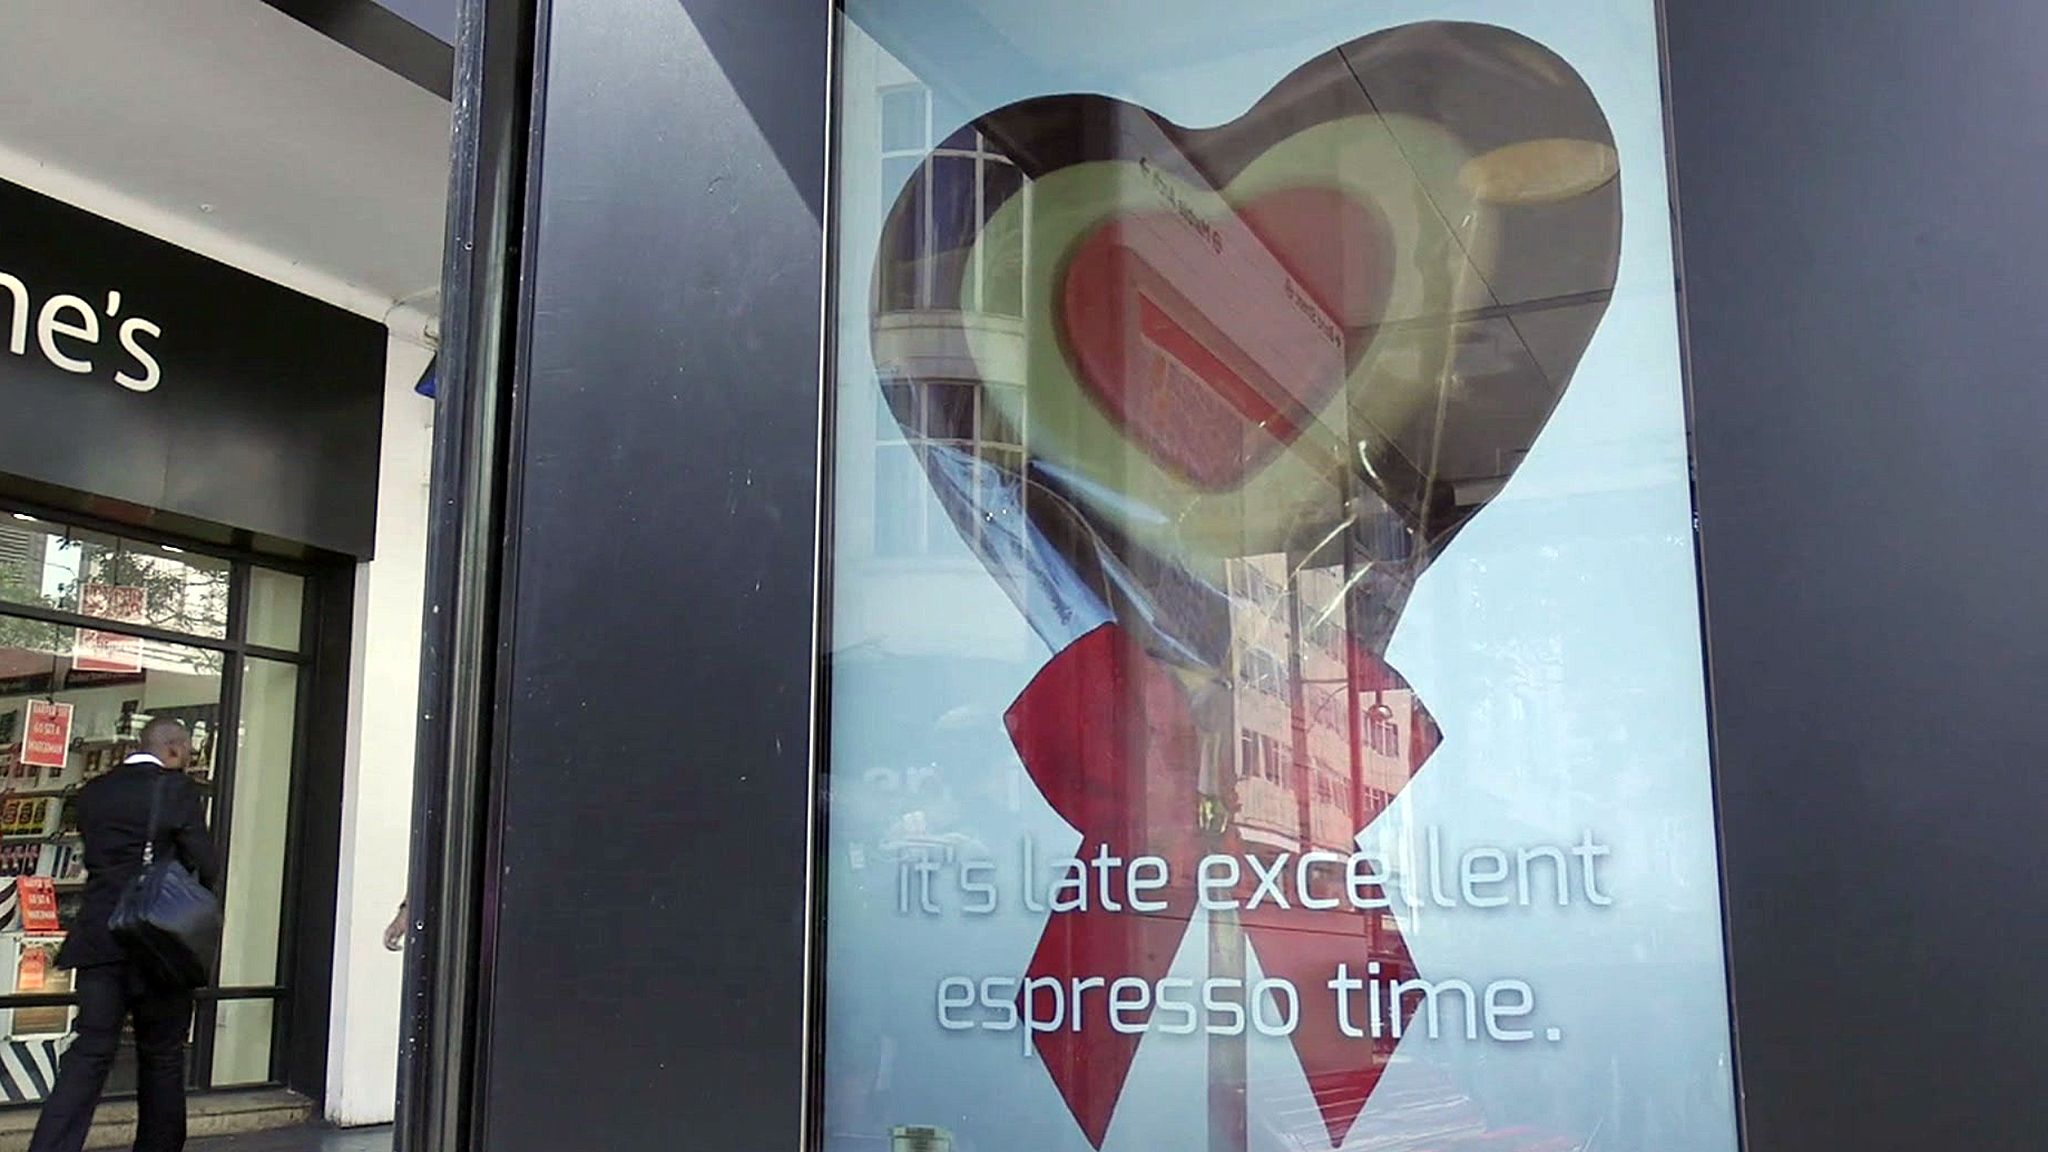 A bus stop advert that uses artificial intelligence to write itself